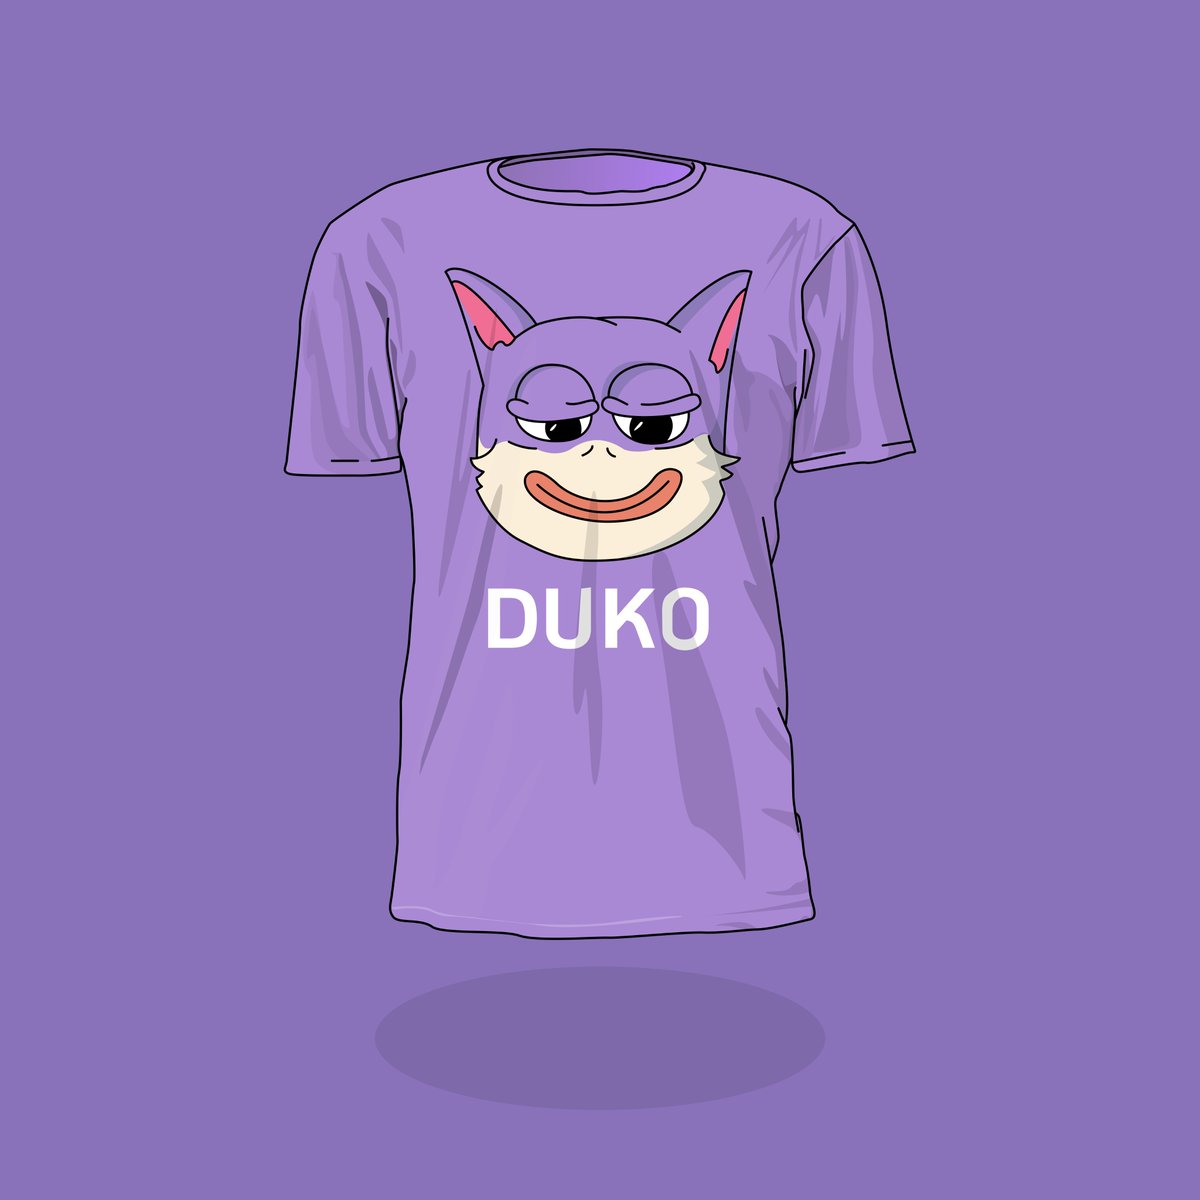 Wen $DUKO tees? 🐶💜 Make it possible @SrPetersETH and @dukocoin 😍👍